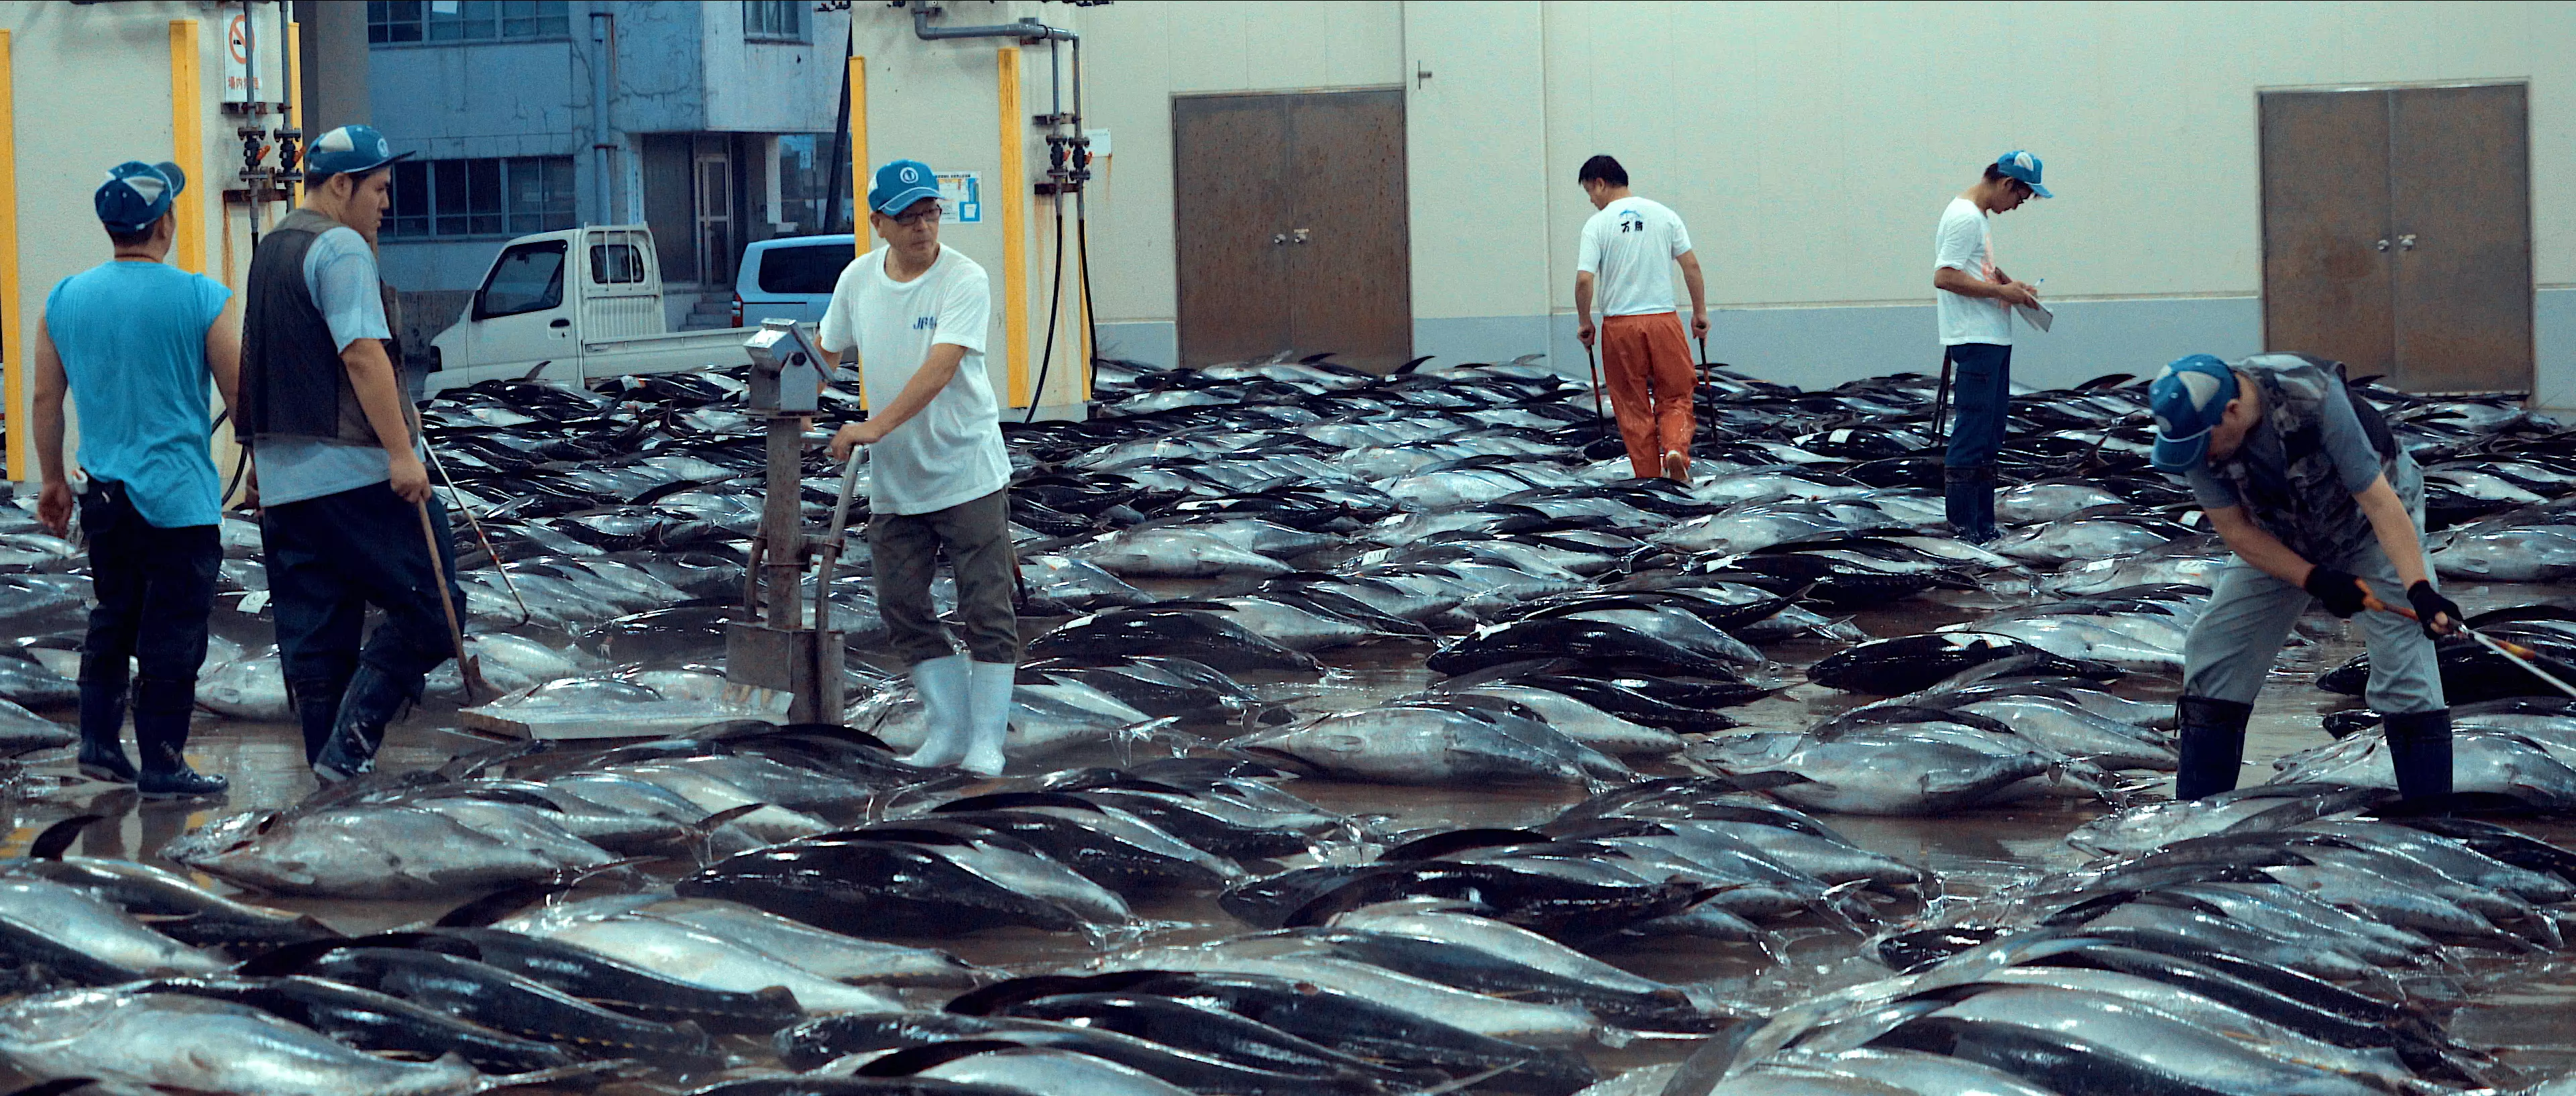 Others challenged the doc's claims about sustainable fishing (